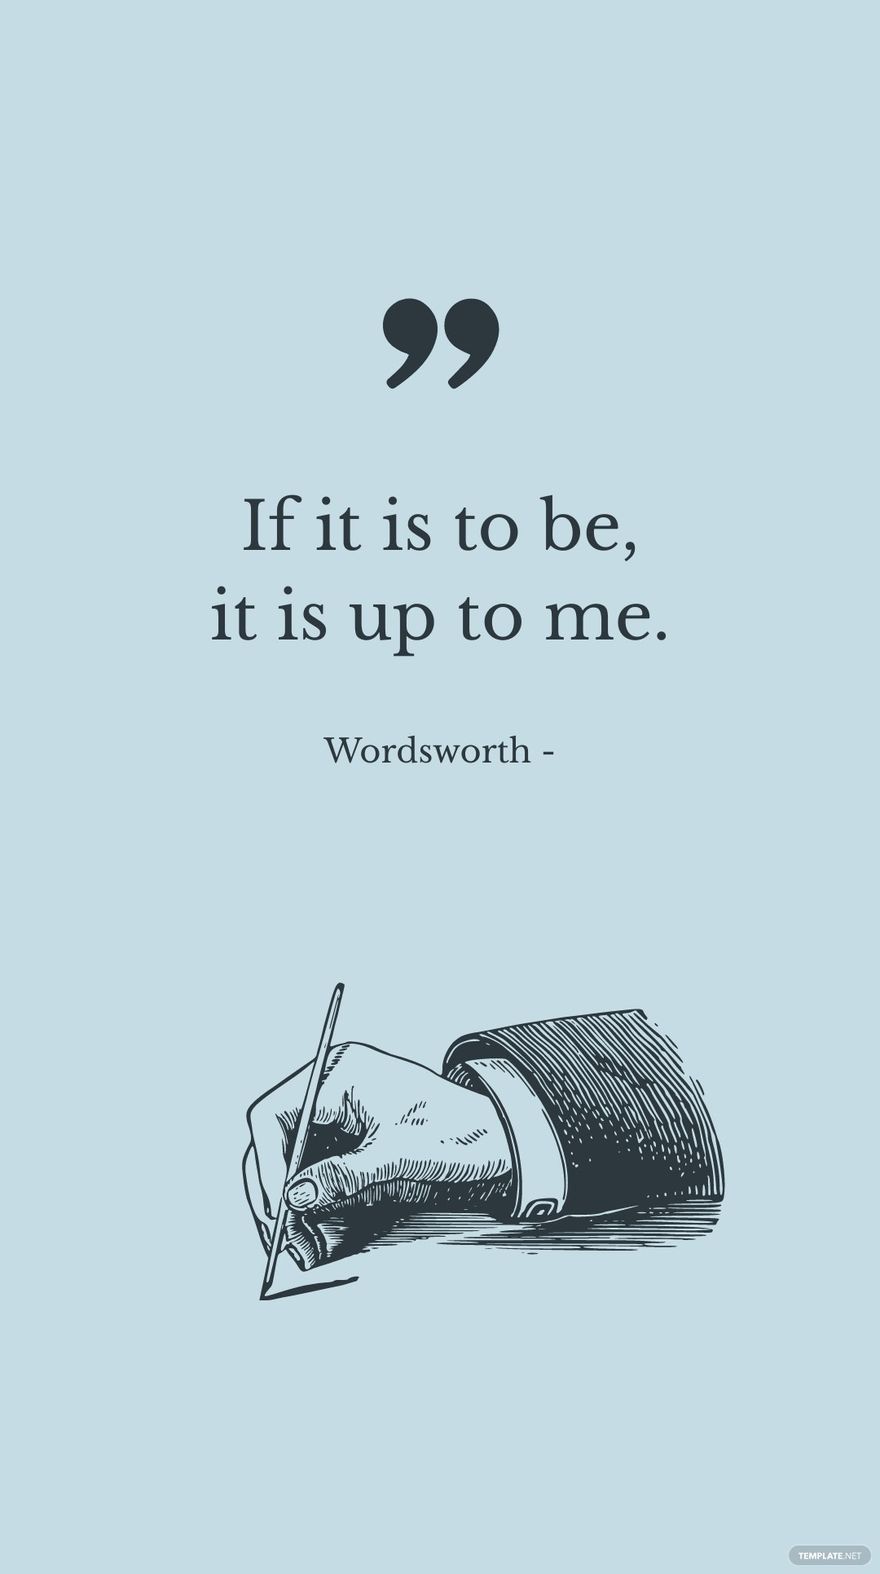 Free Wordsworth - If it is to be, it is up to me. in JPG